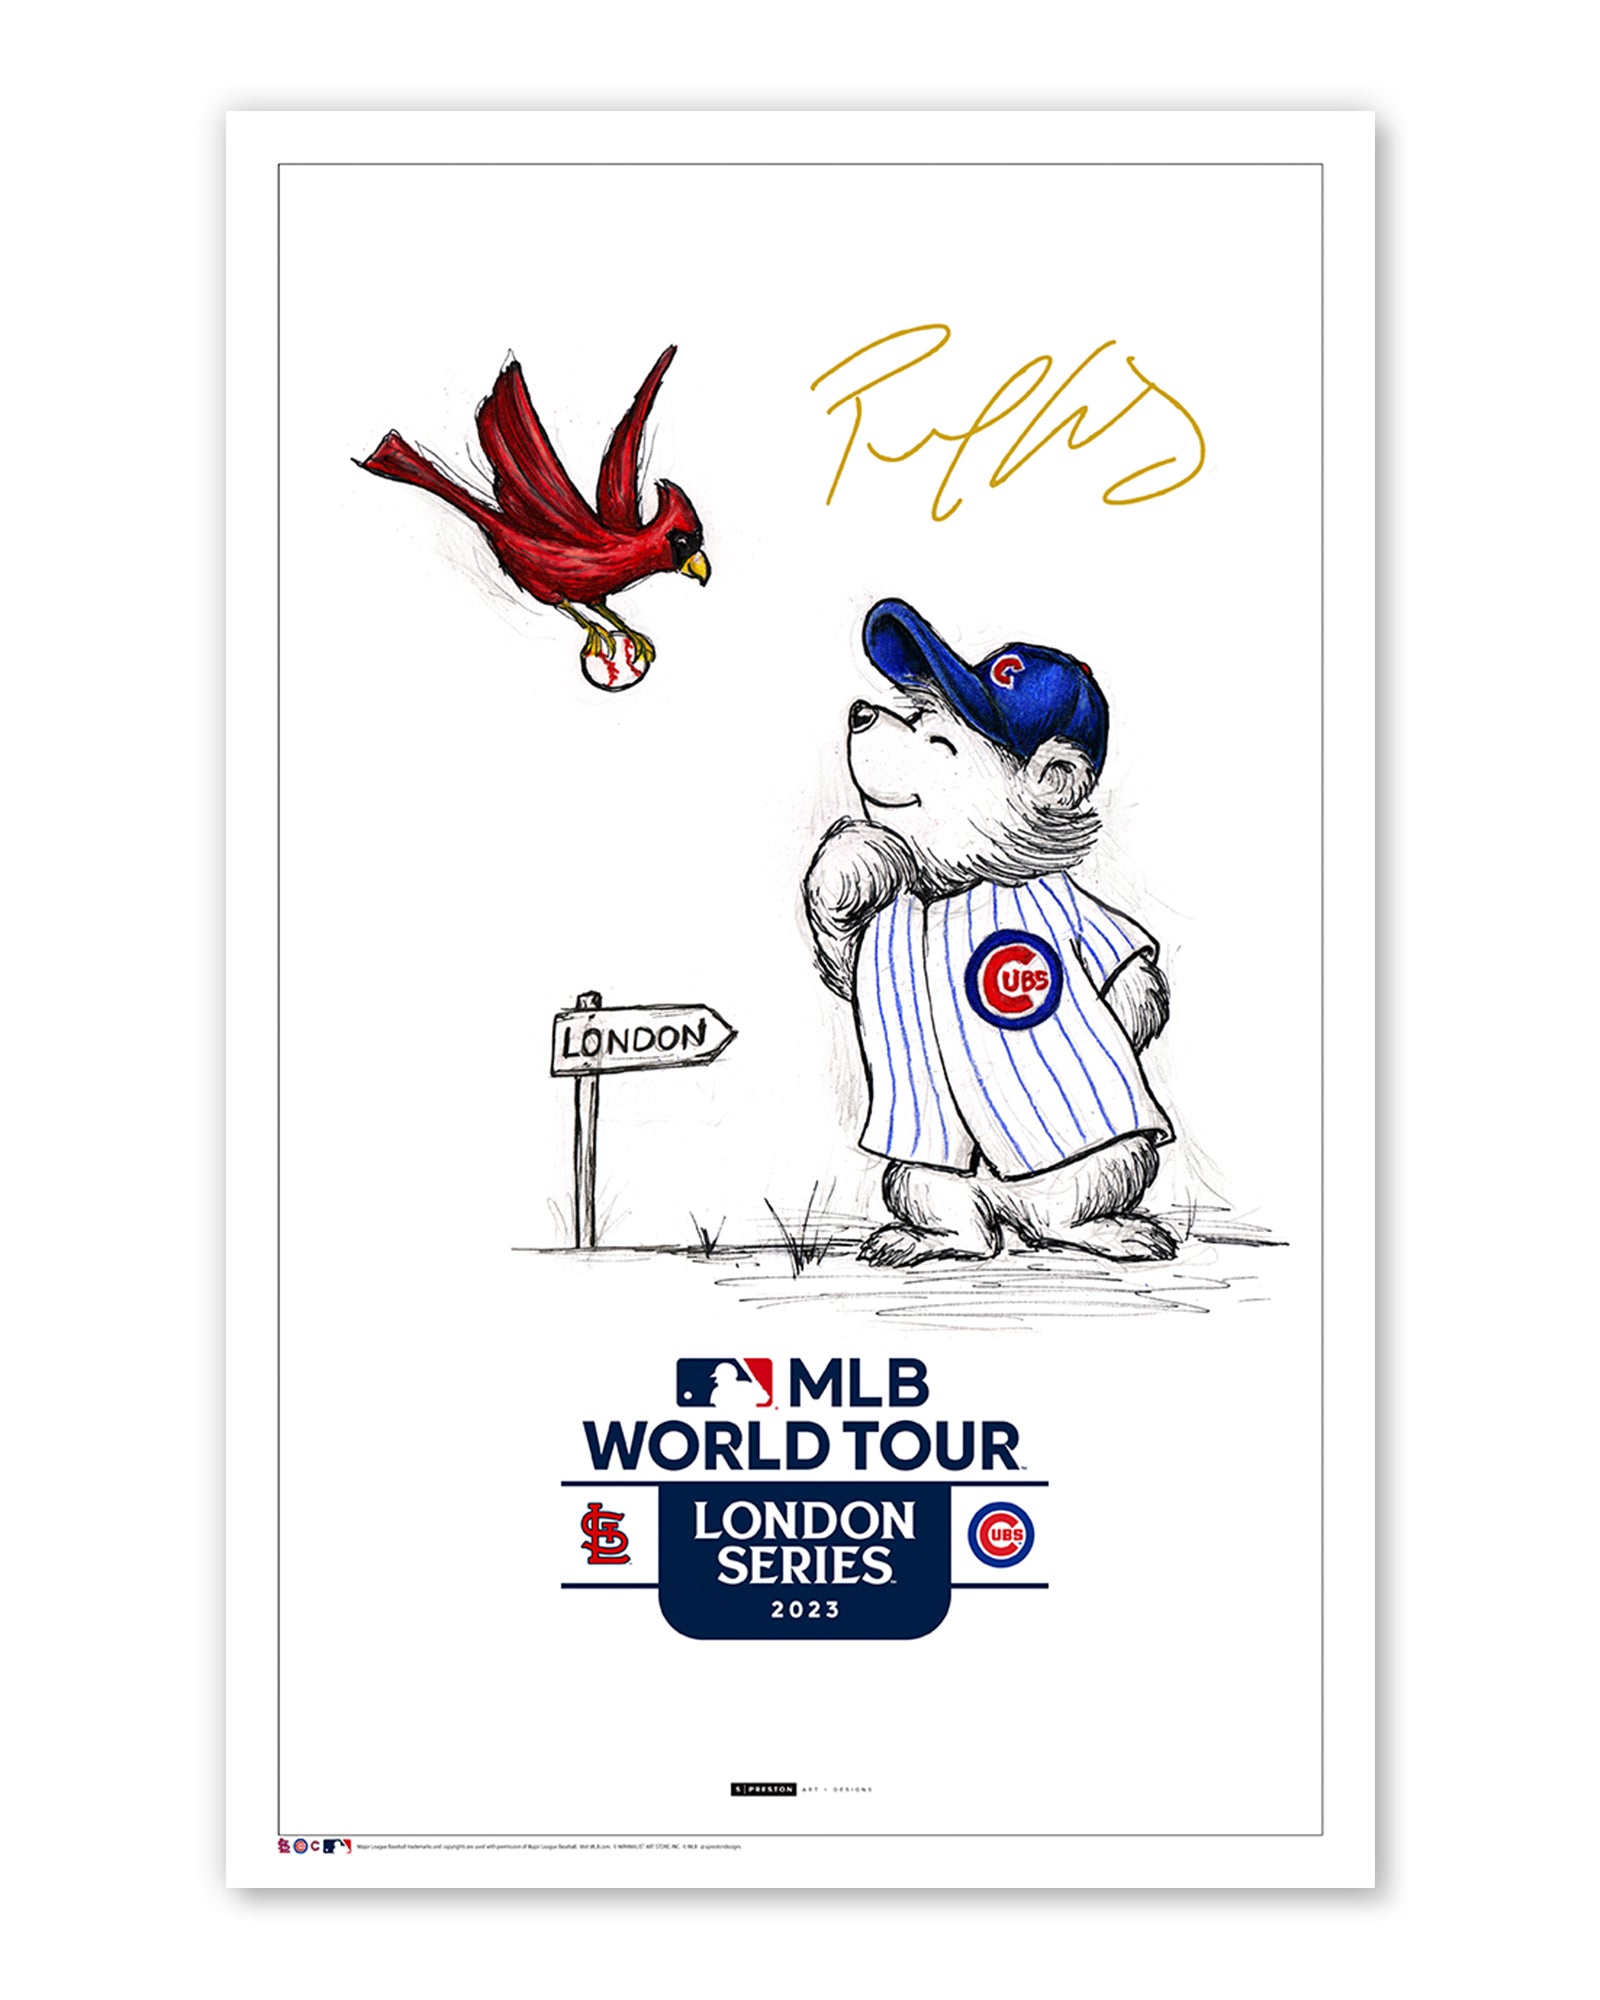 Believe It! Chicago Cubs World Series Champions Commemorative Book